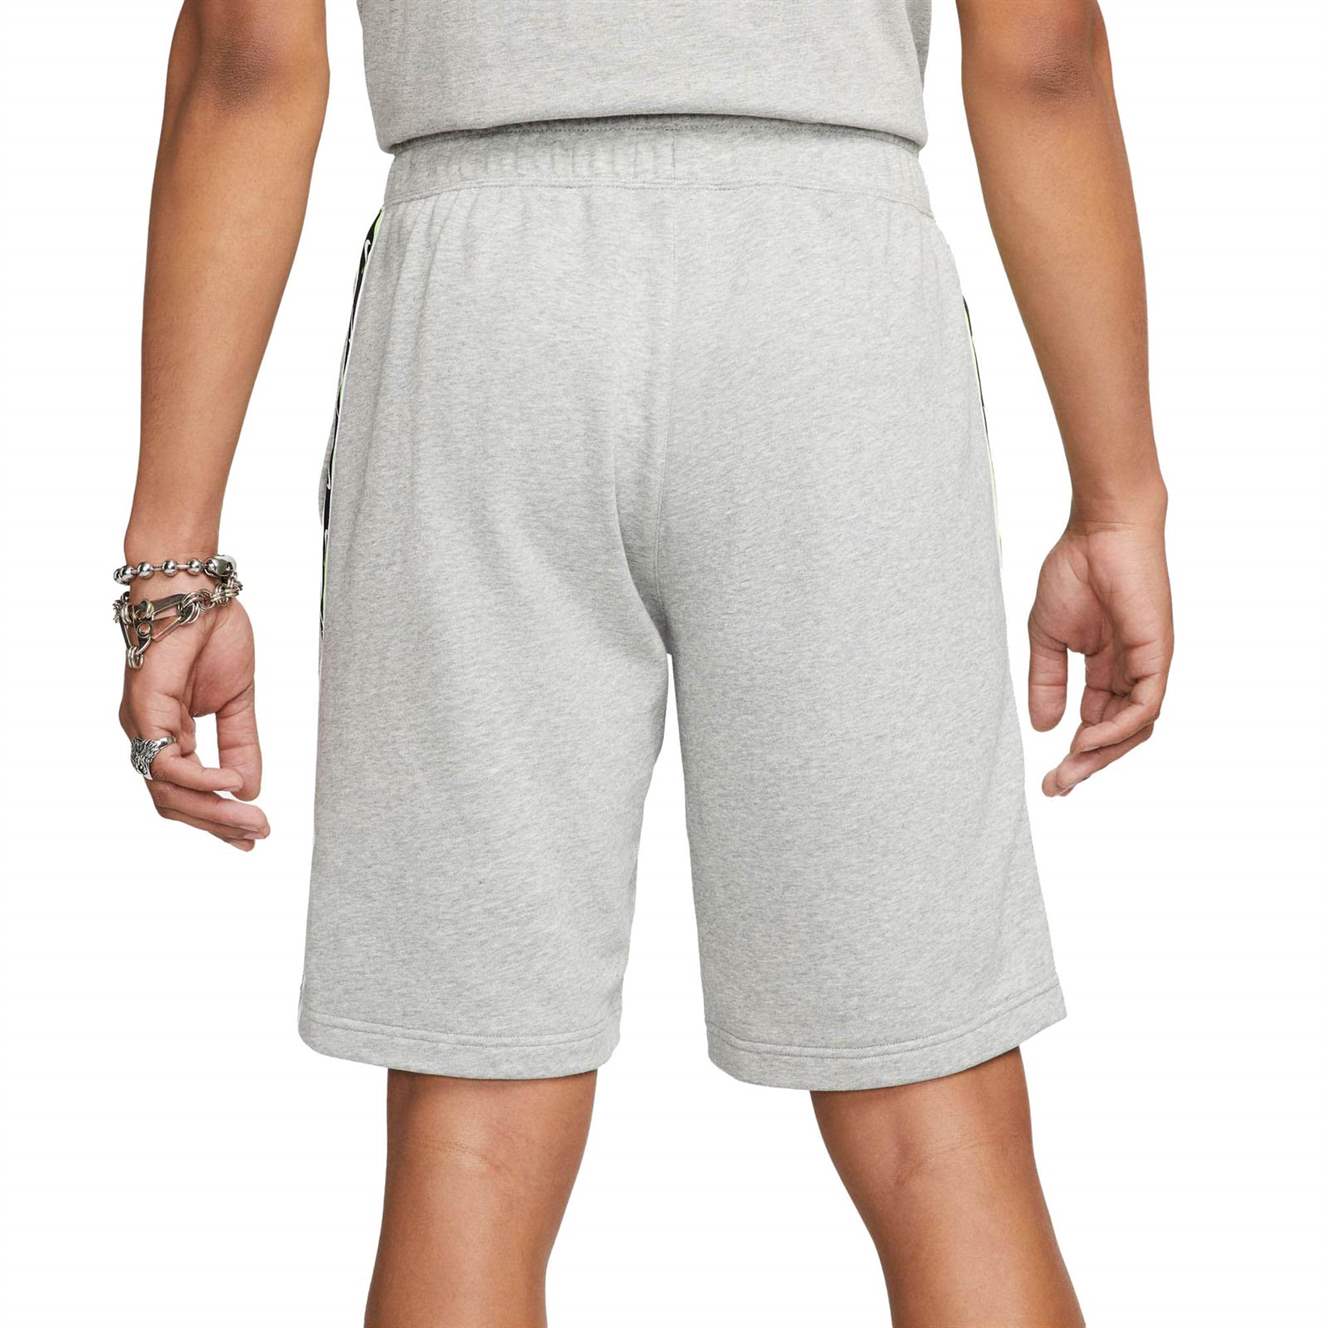 NIKE SPORTSWEAR MENS REPEAT FRENCH TERRY SHORTS